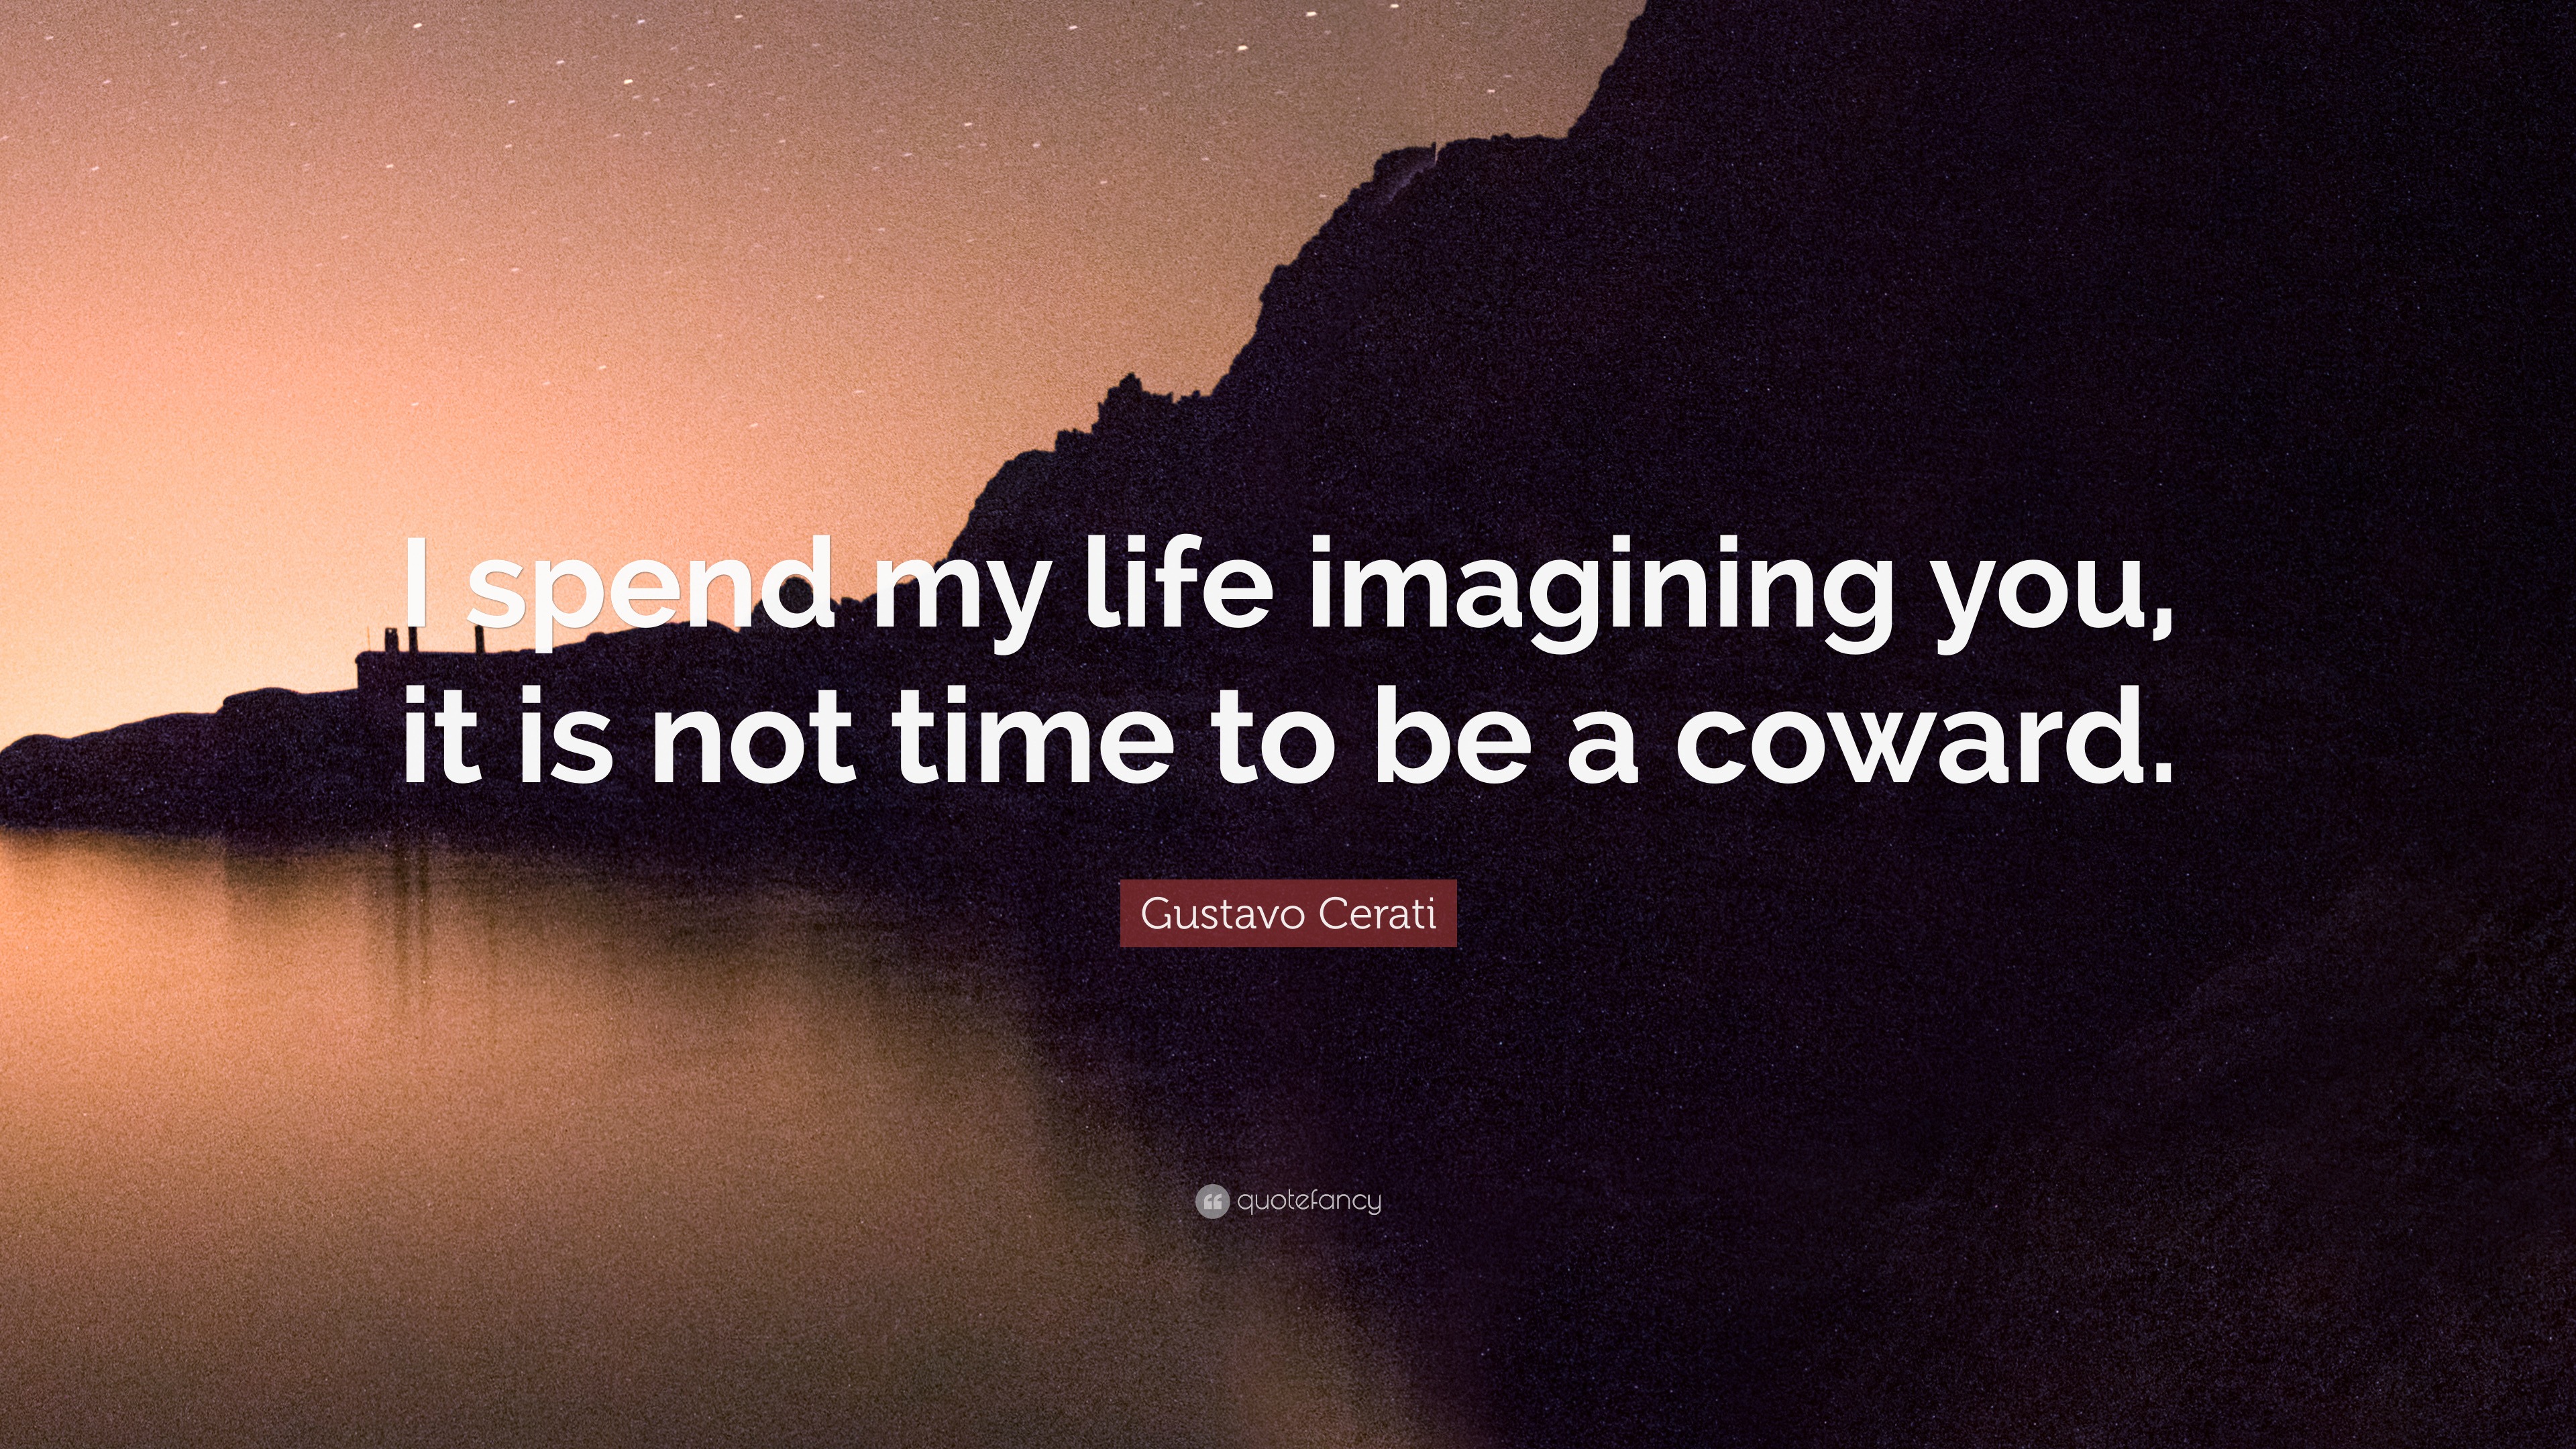 Gustavo Cerati Quote: “I spend my life imagining you, it is not time to ...